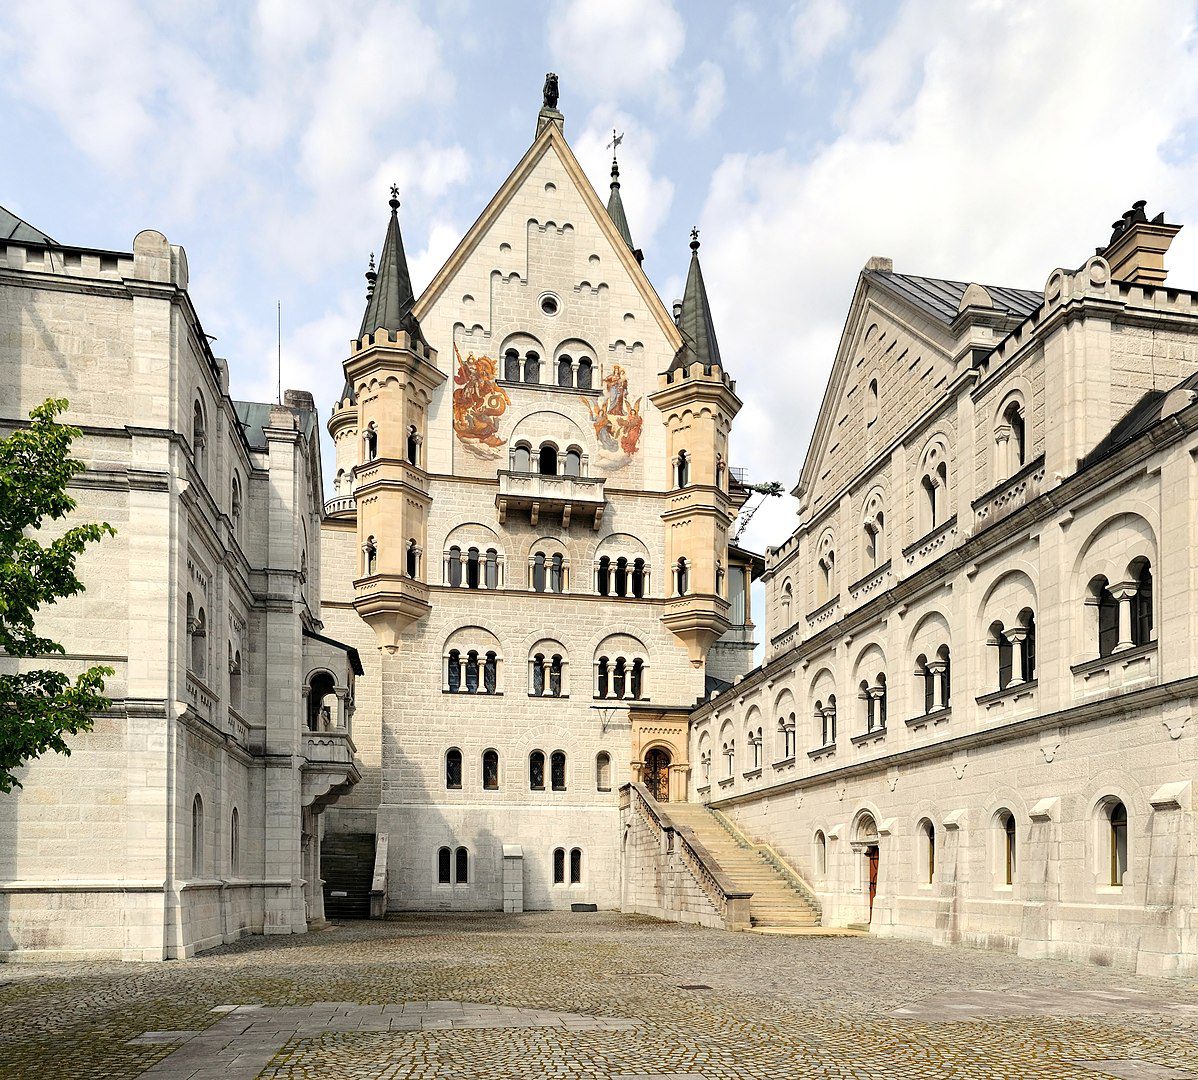 View from location of unrealised chapel along upper courtyard level bower (left), palace front, and knights' house (right)